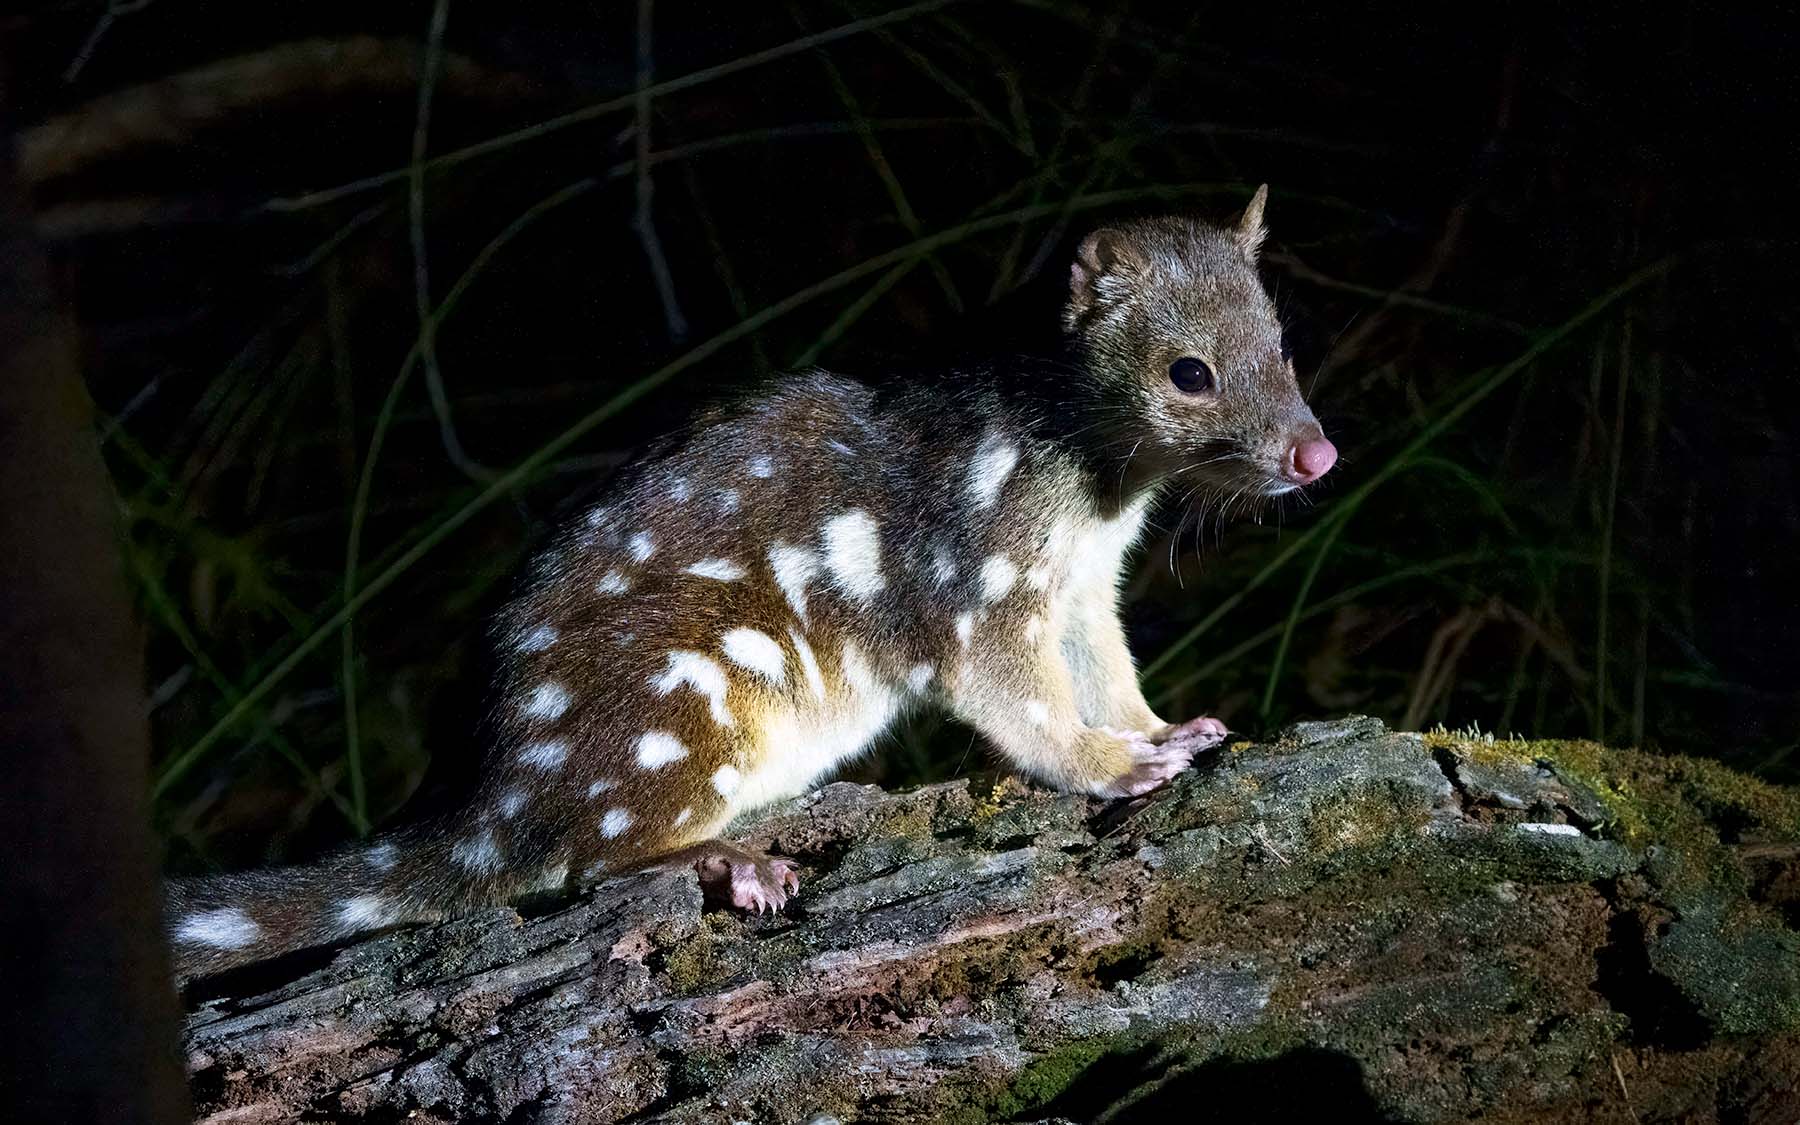 A small furry mammal with spotted fur standing on a log